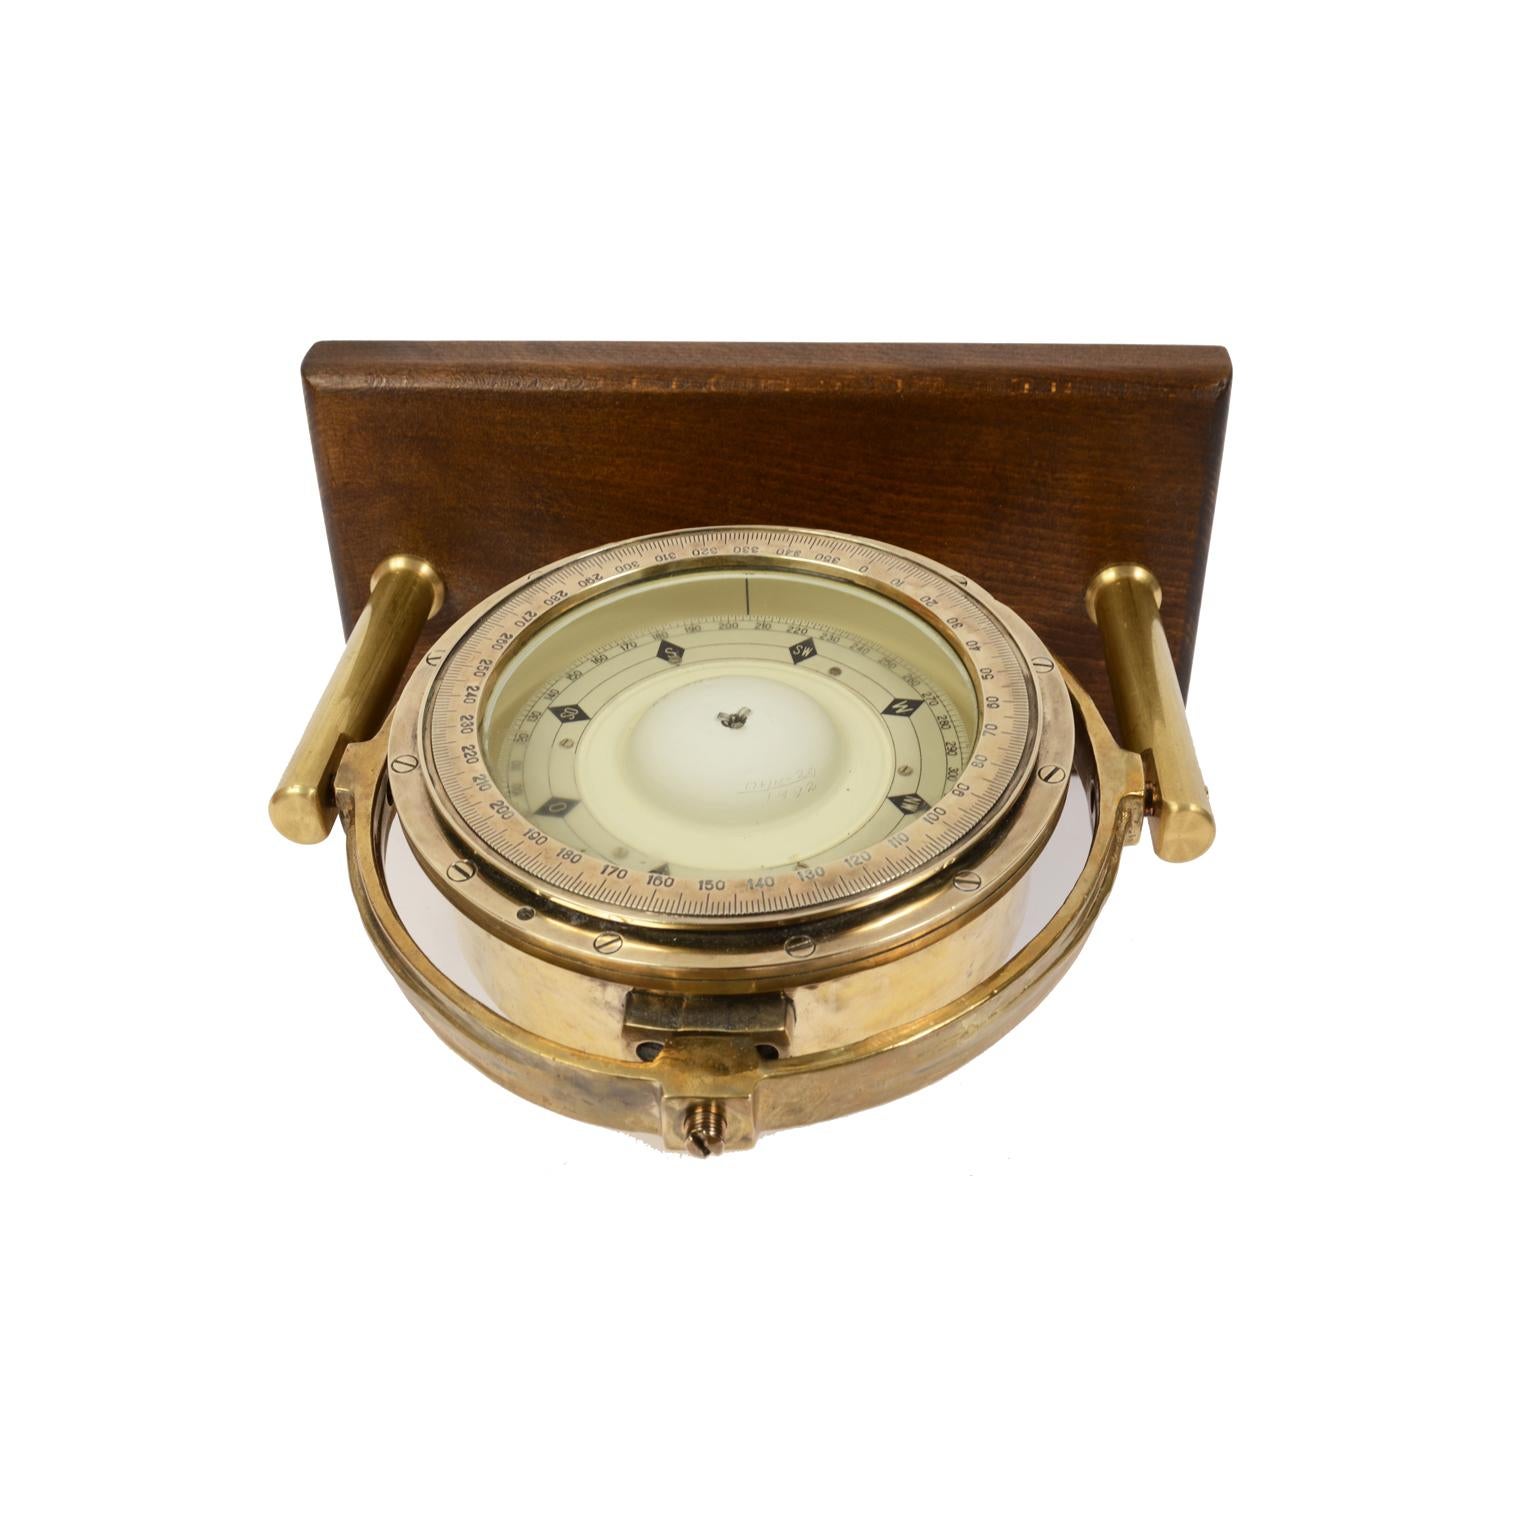 British Nautical Compass of Brass and Glass Made in the Early 1900s on a Walnut Board